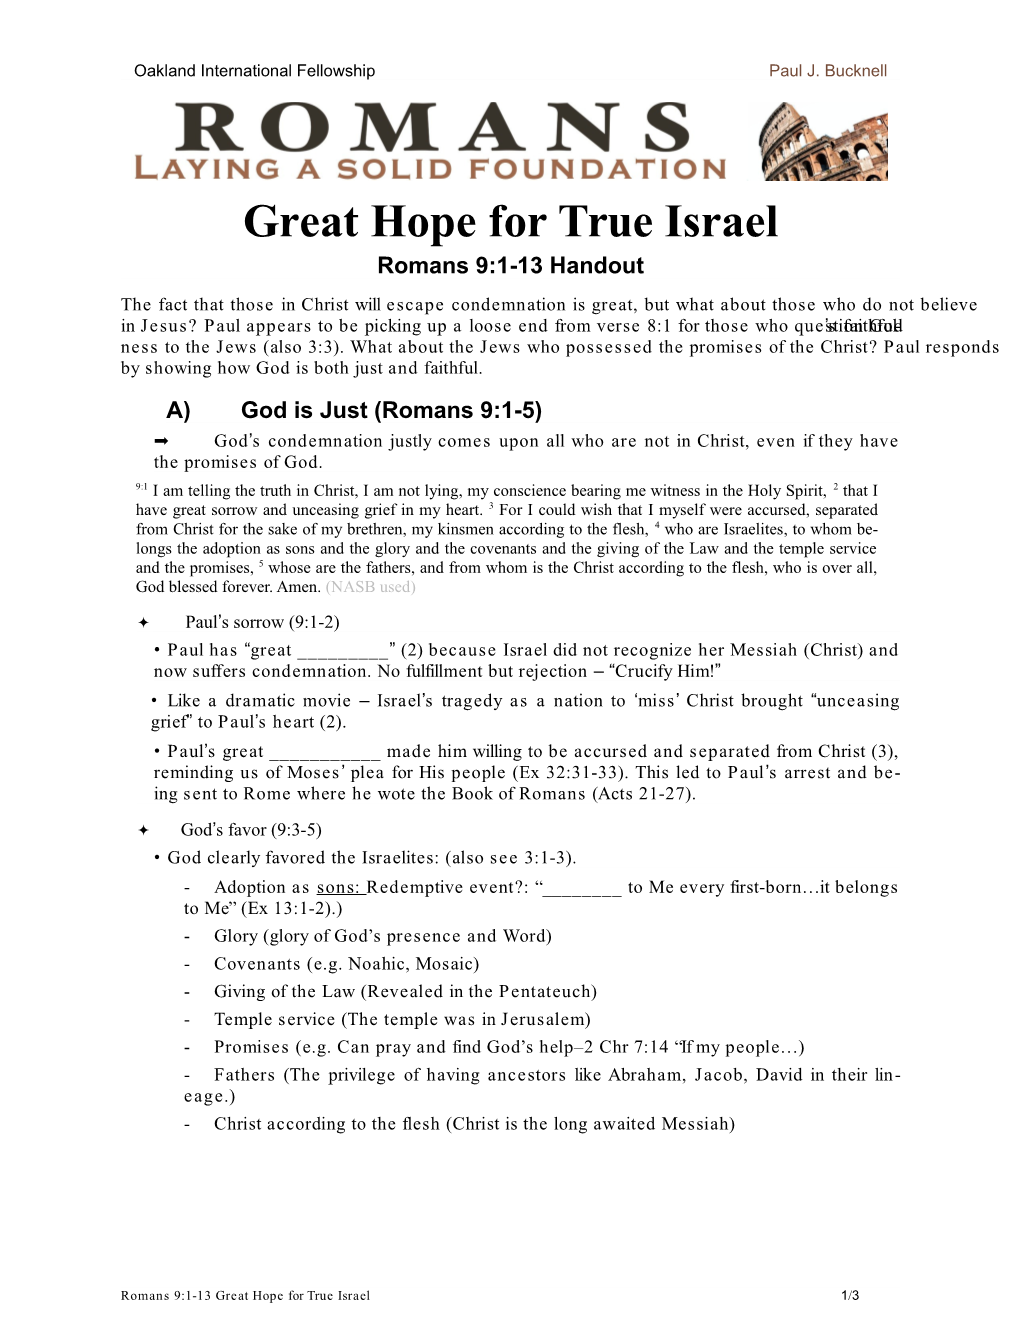 Great Hope for True Israel